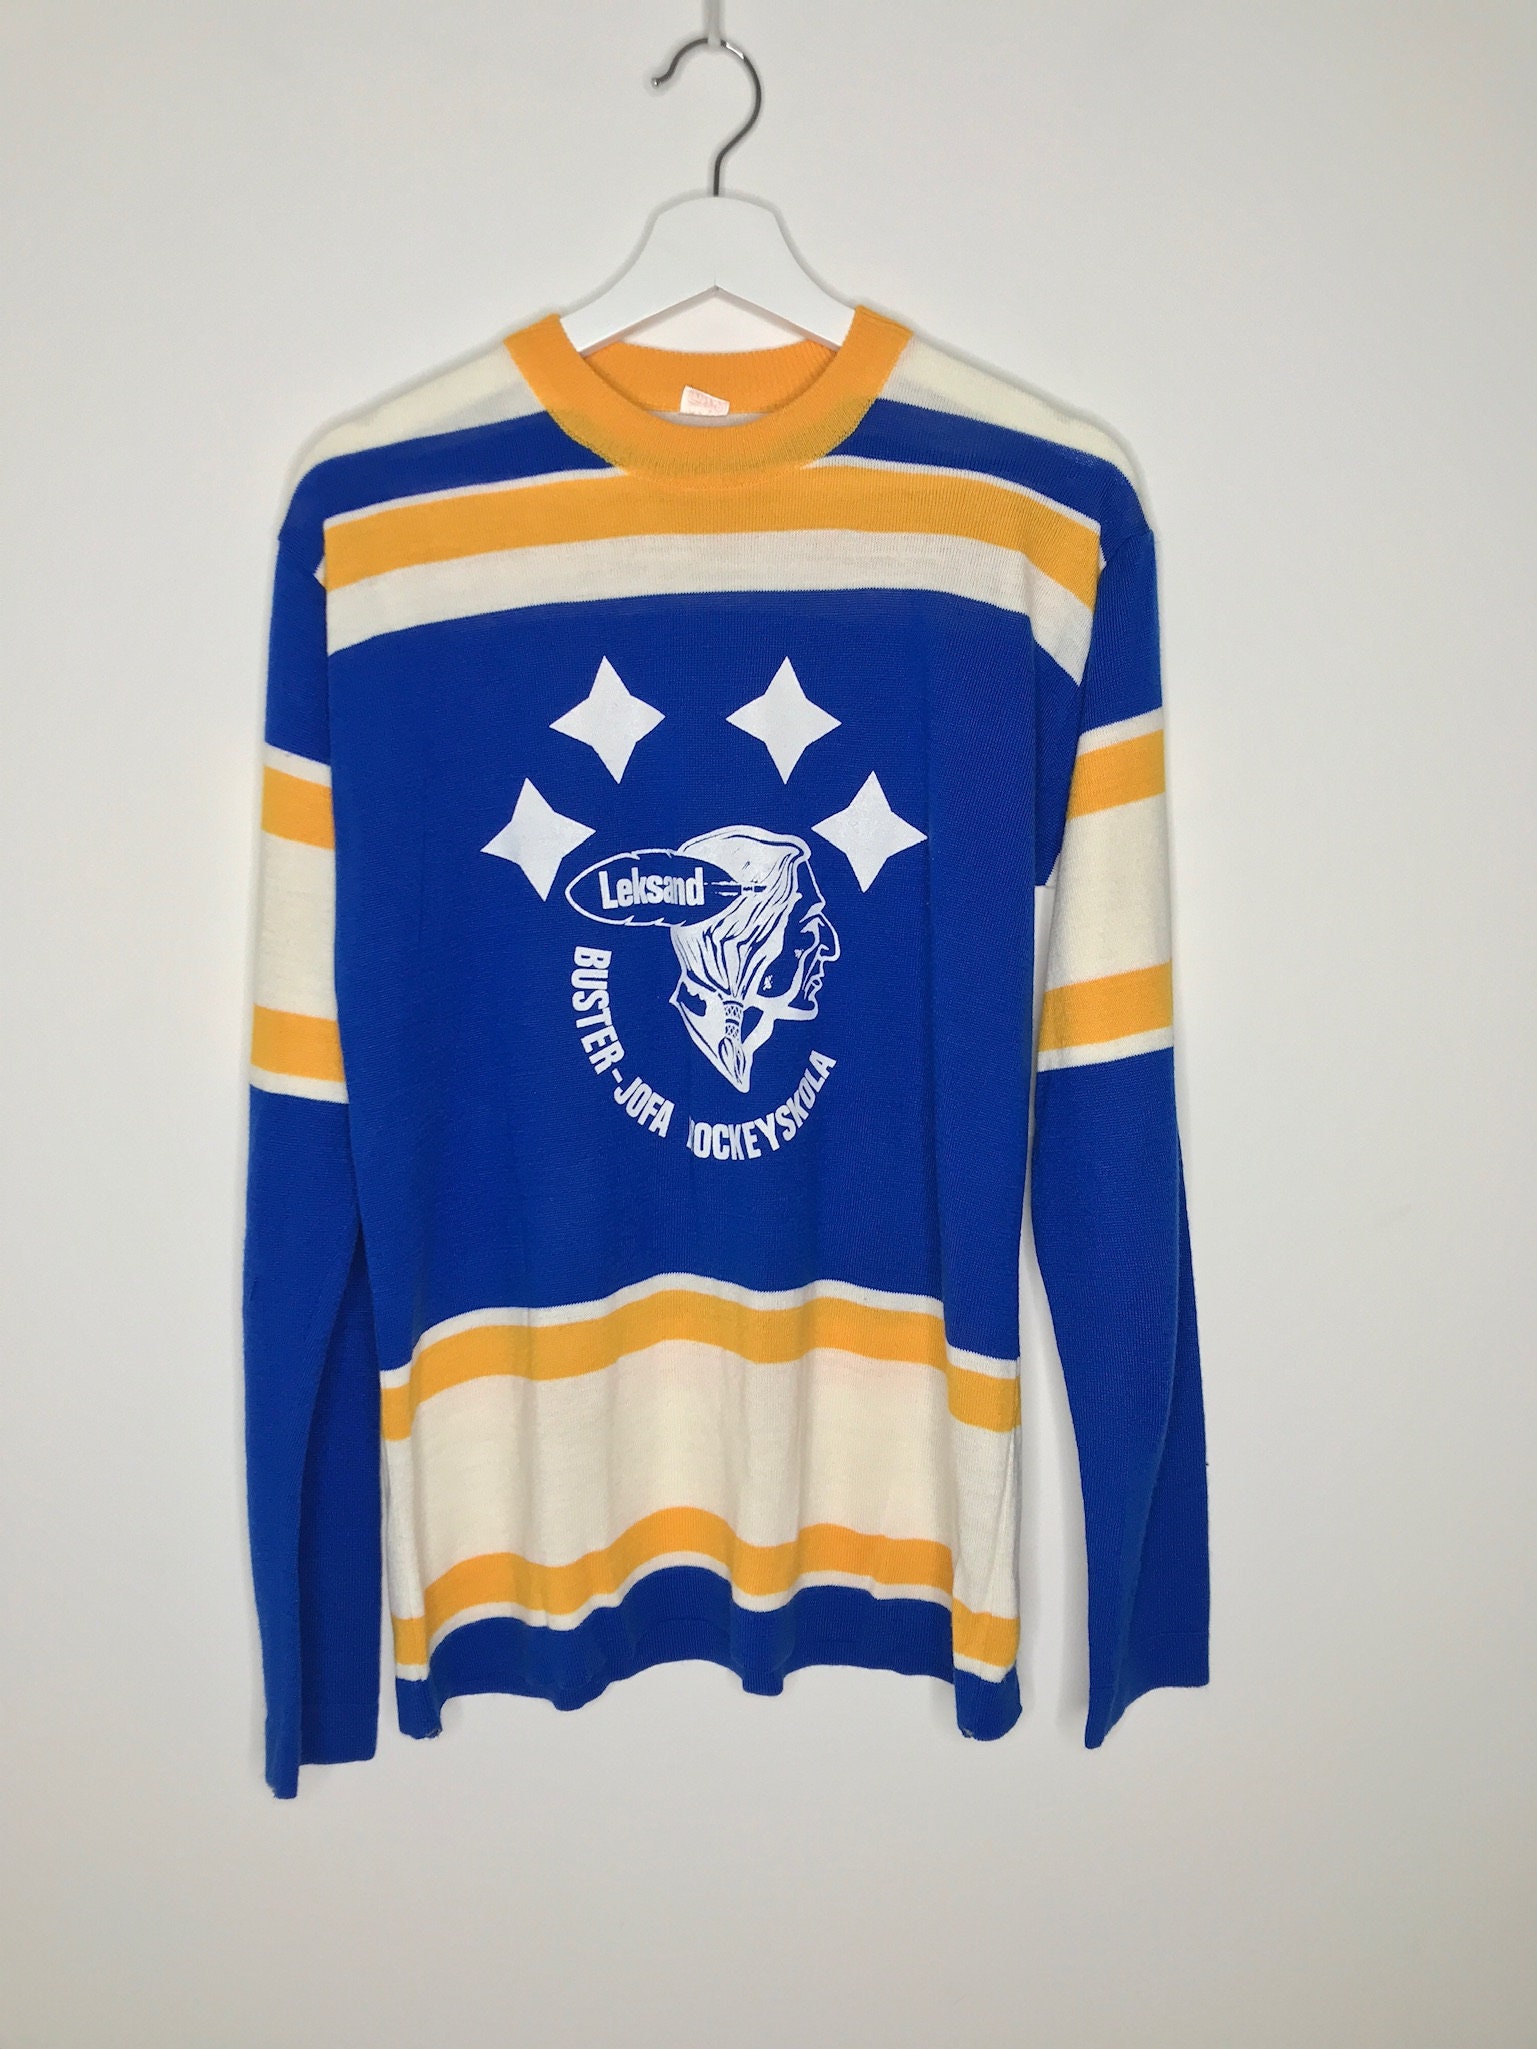  Throwback Trump #45 Rochester Hockey Jersey Sewn Custom Name  (M) White : Clothing, Shoes & Jewelry